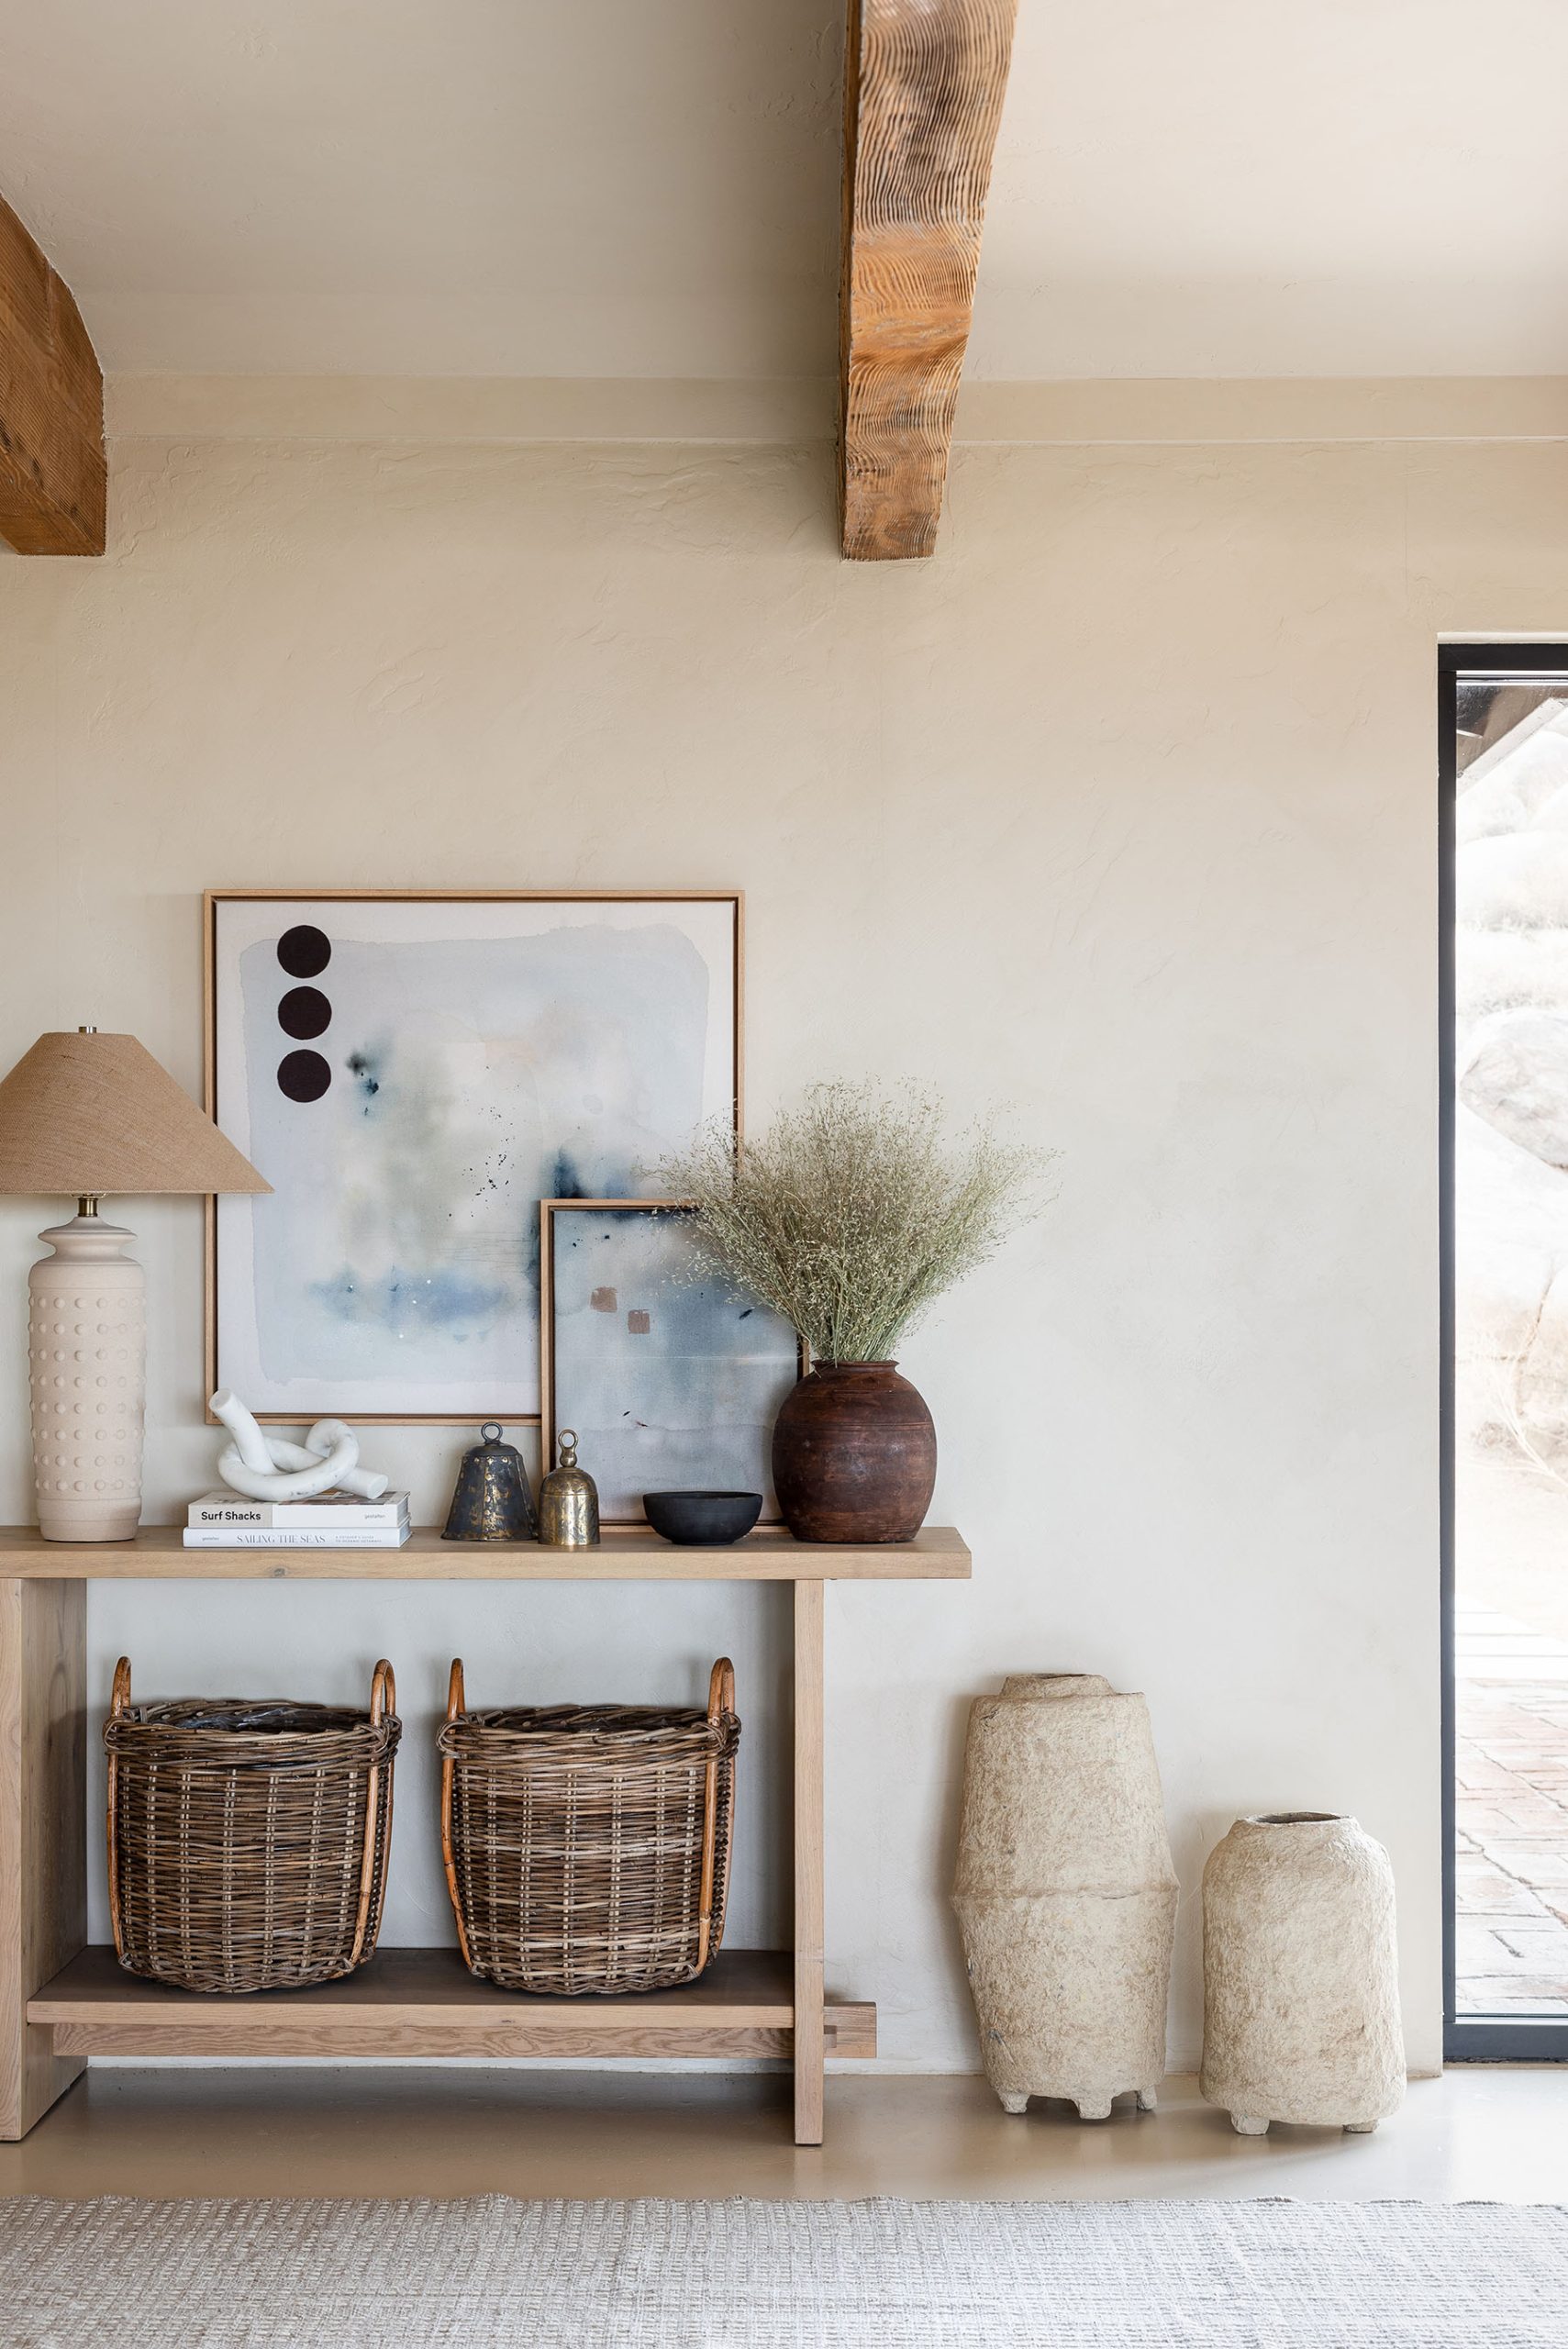 plaster vases next to console table styled with baskets and artwork